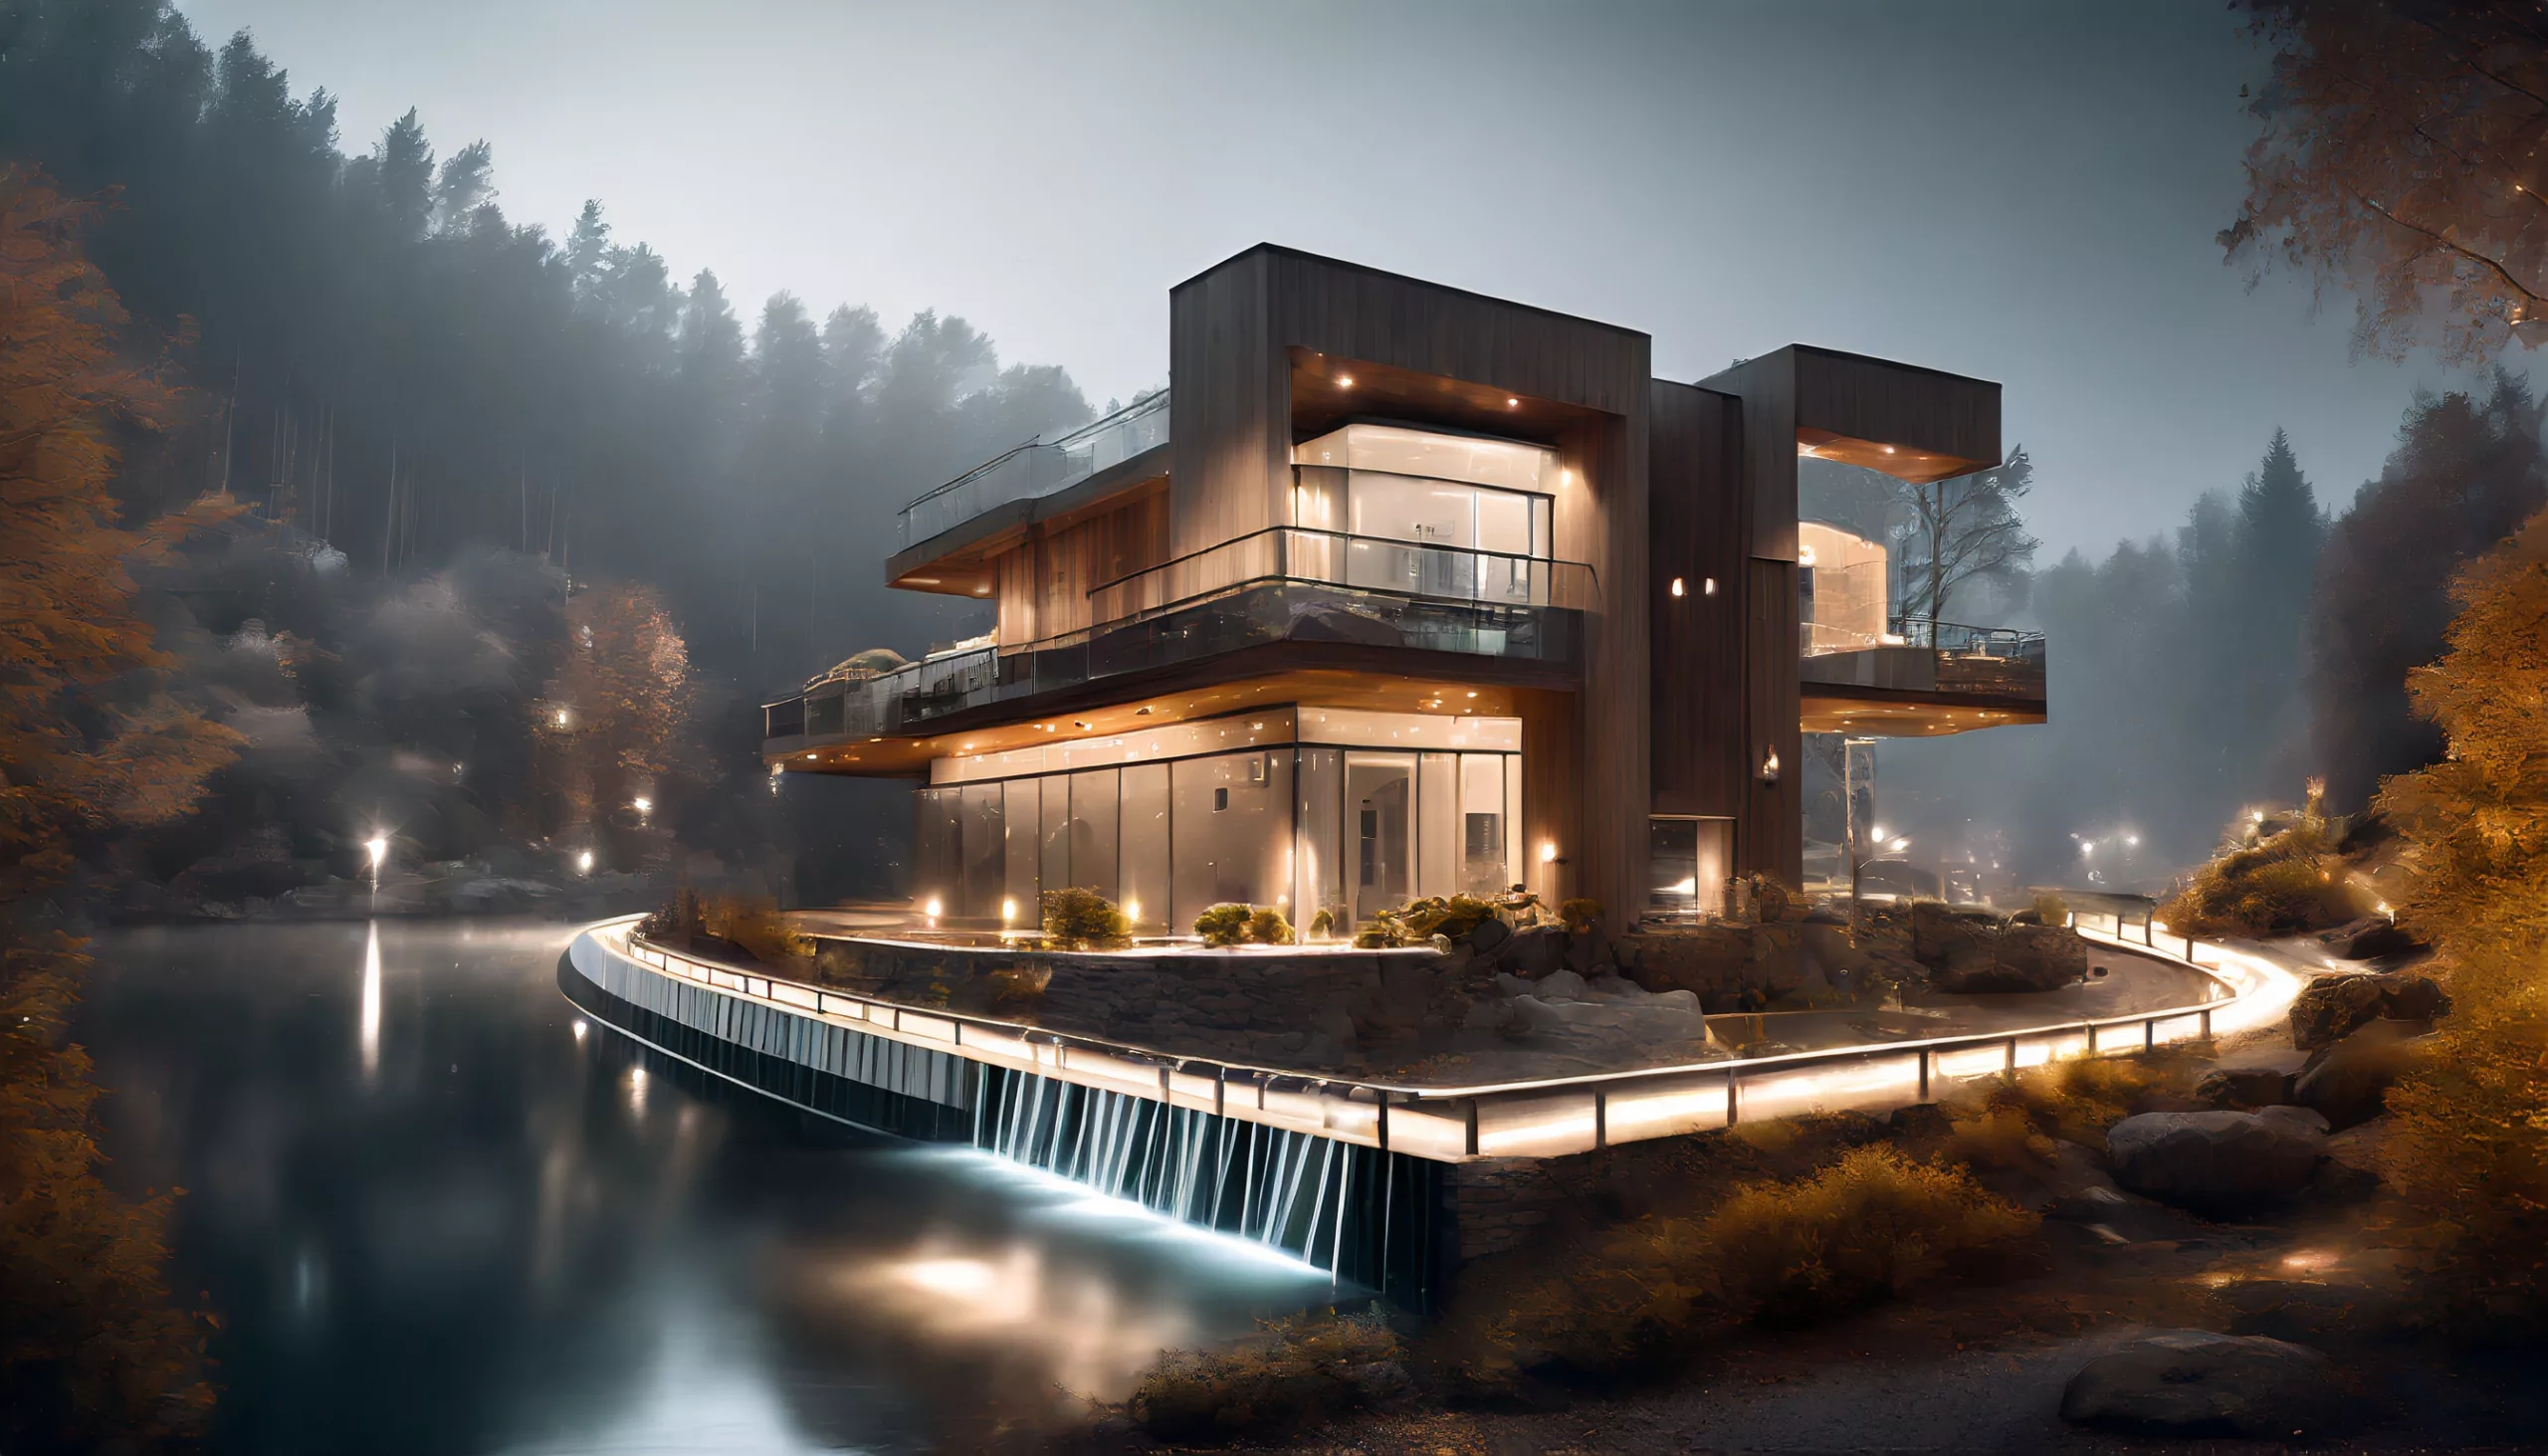 Hydro Power in a futuristic looking home